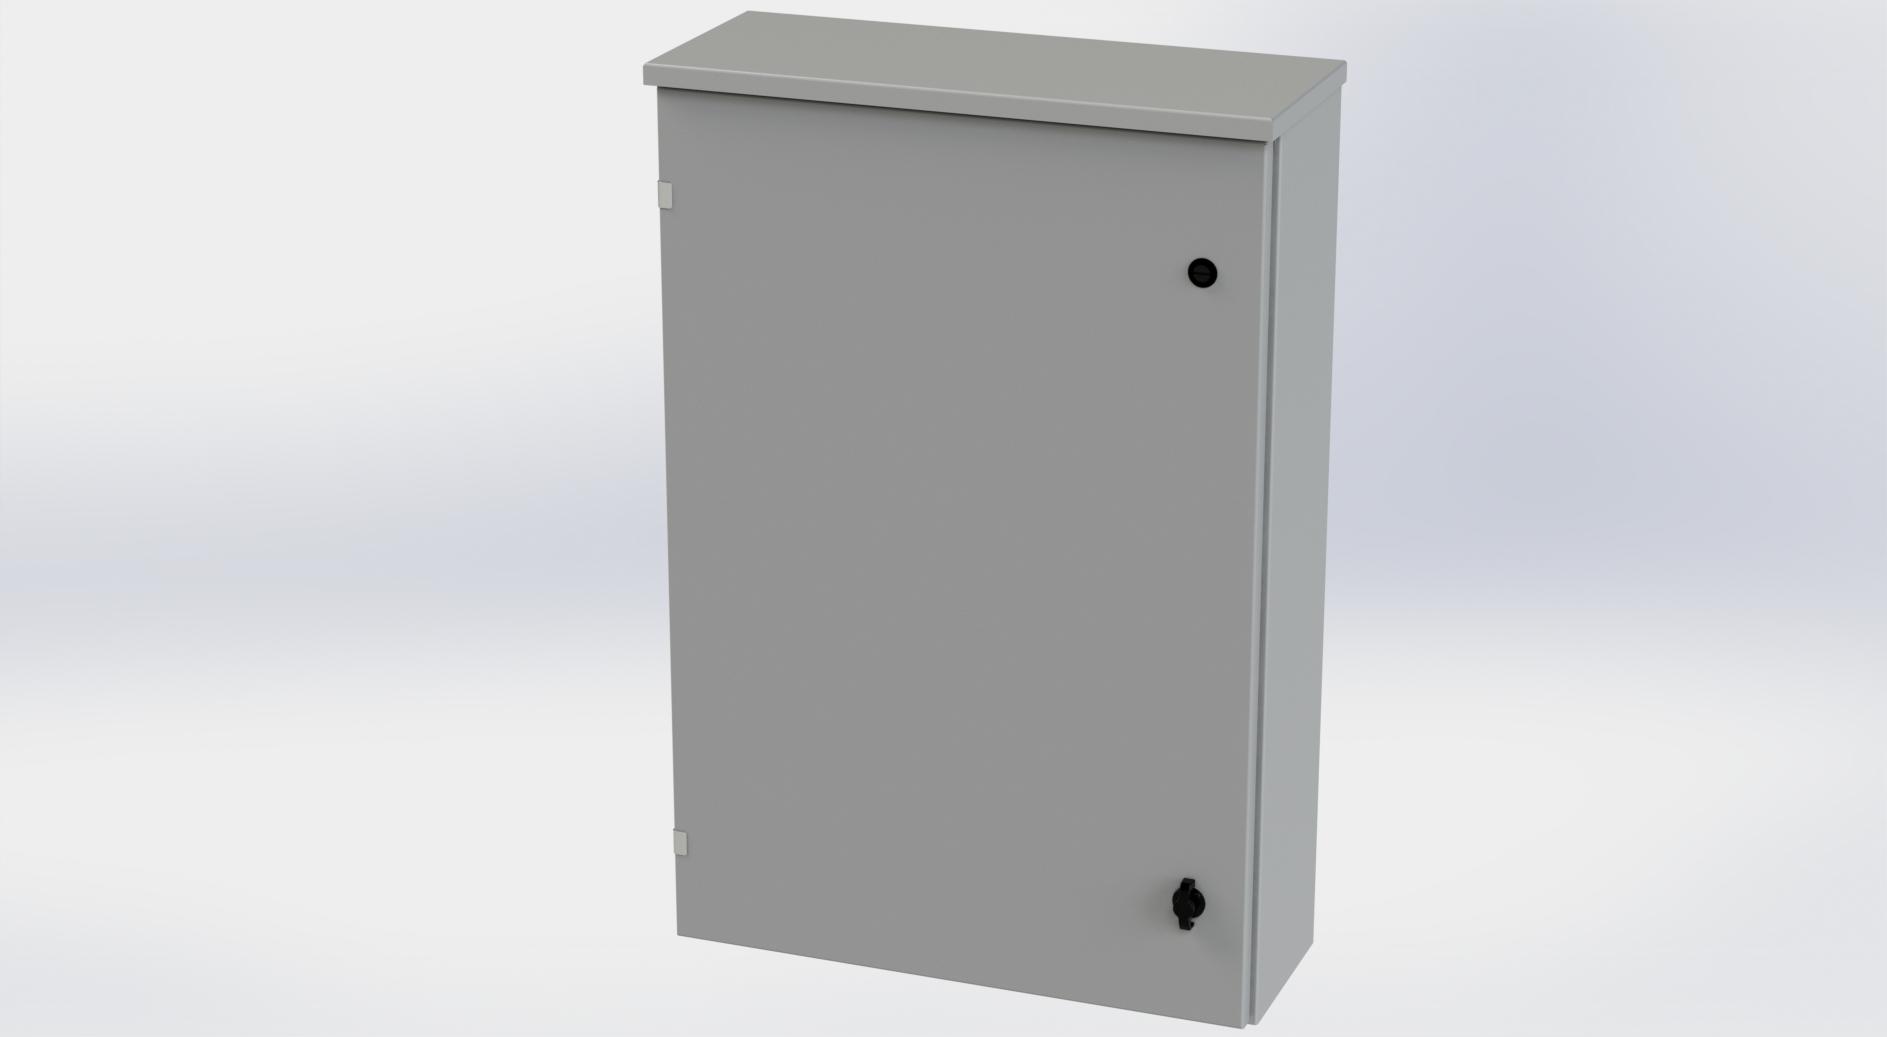 Saginaw Control SCE-36R2408LP Type-3R Hinged Cover Enclosure, Height:36.00", Width:24.00", Depth:8.00", ANSI-61 gray powder coating inside and out. Optional sub-panels are powder coated white.